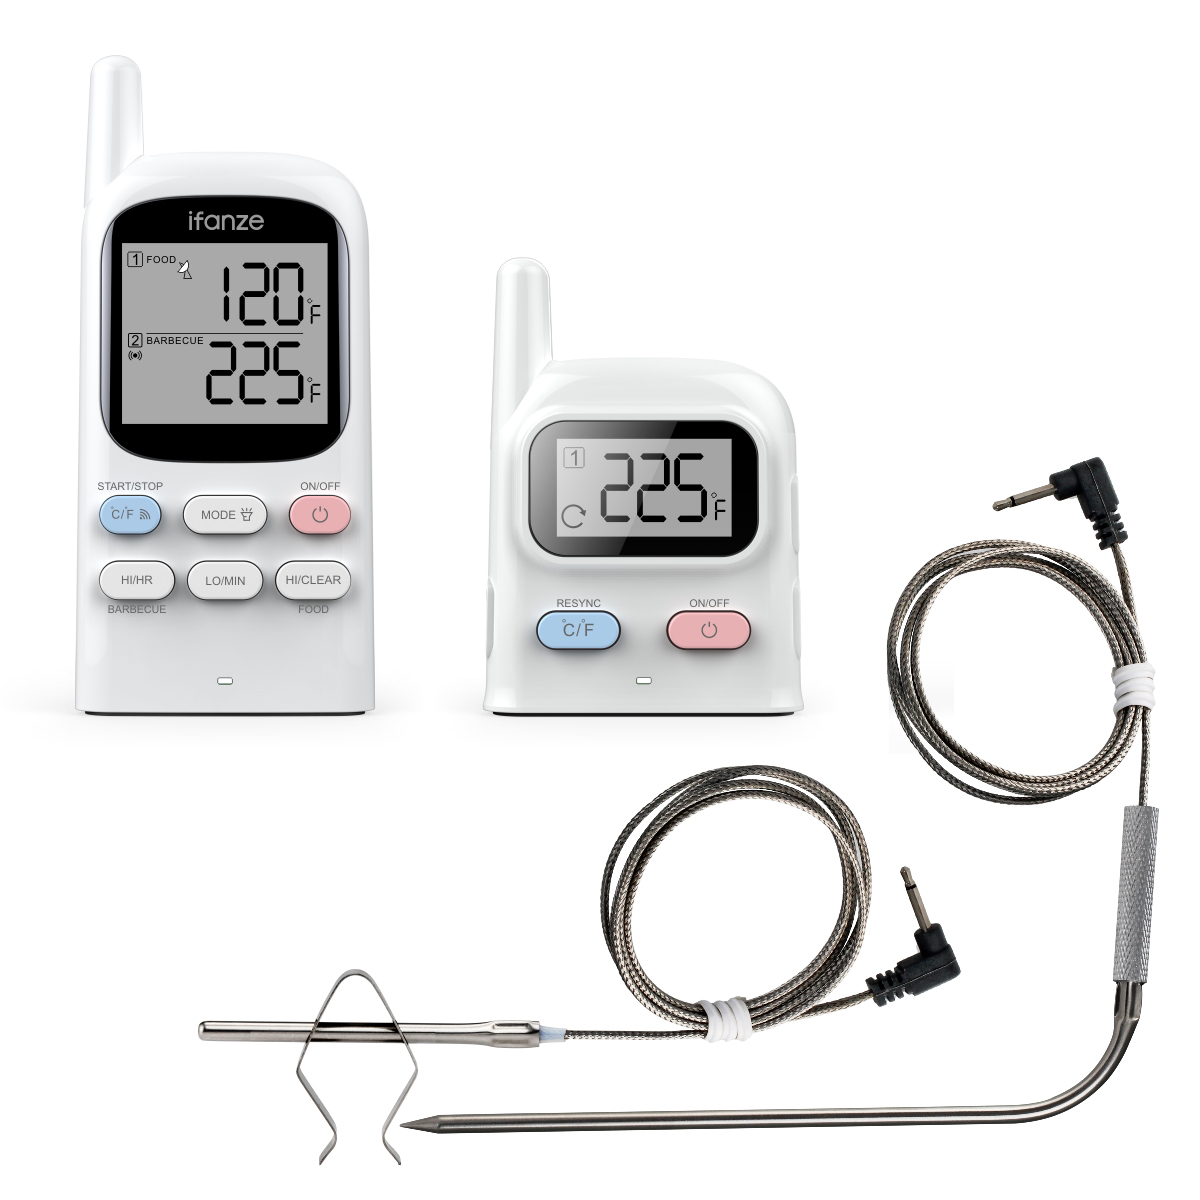 

Digital Wireless Remote Dual 2 Probe Meat Thermometer For BBQ Oven Grill Smoker Cooking Tool